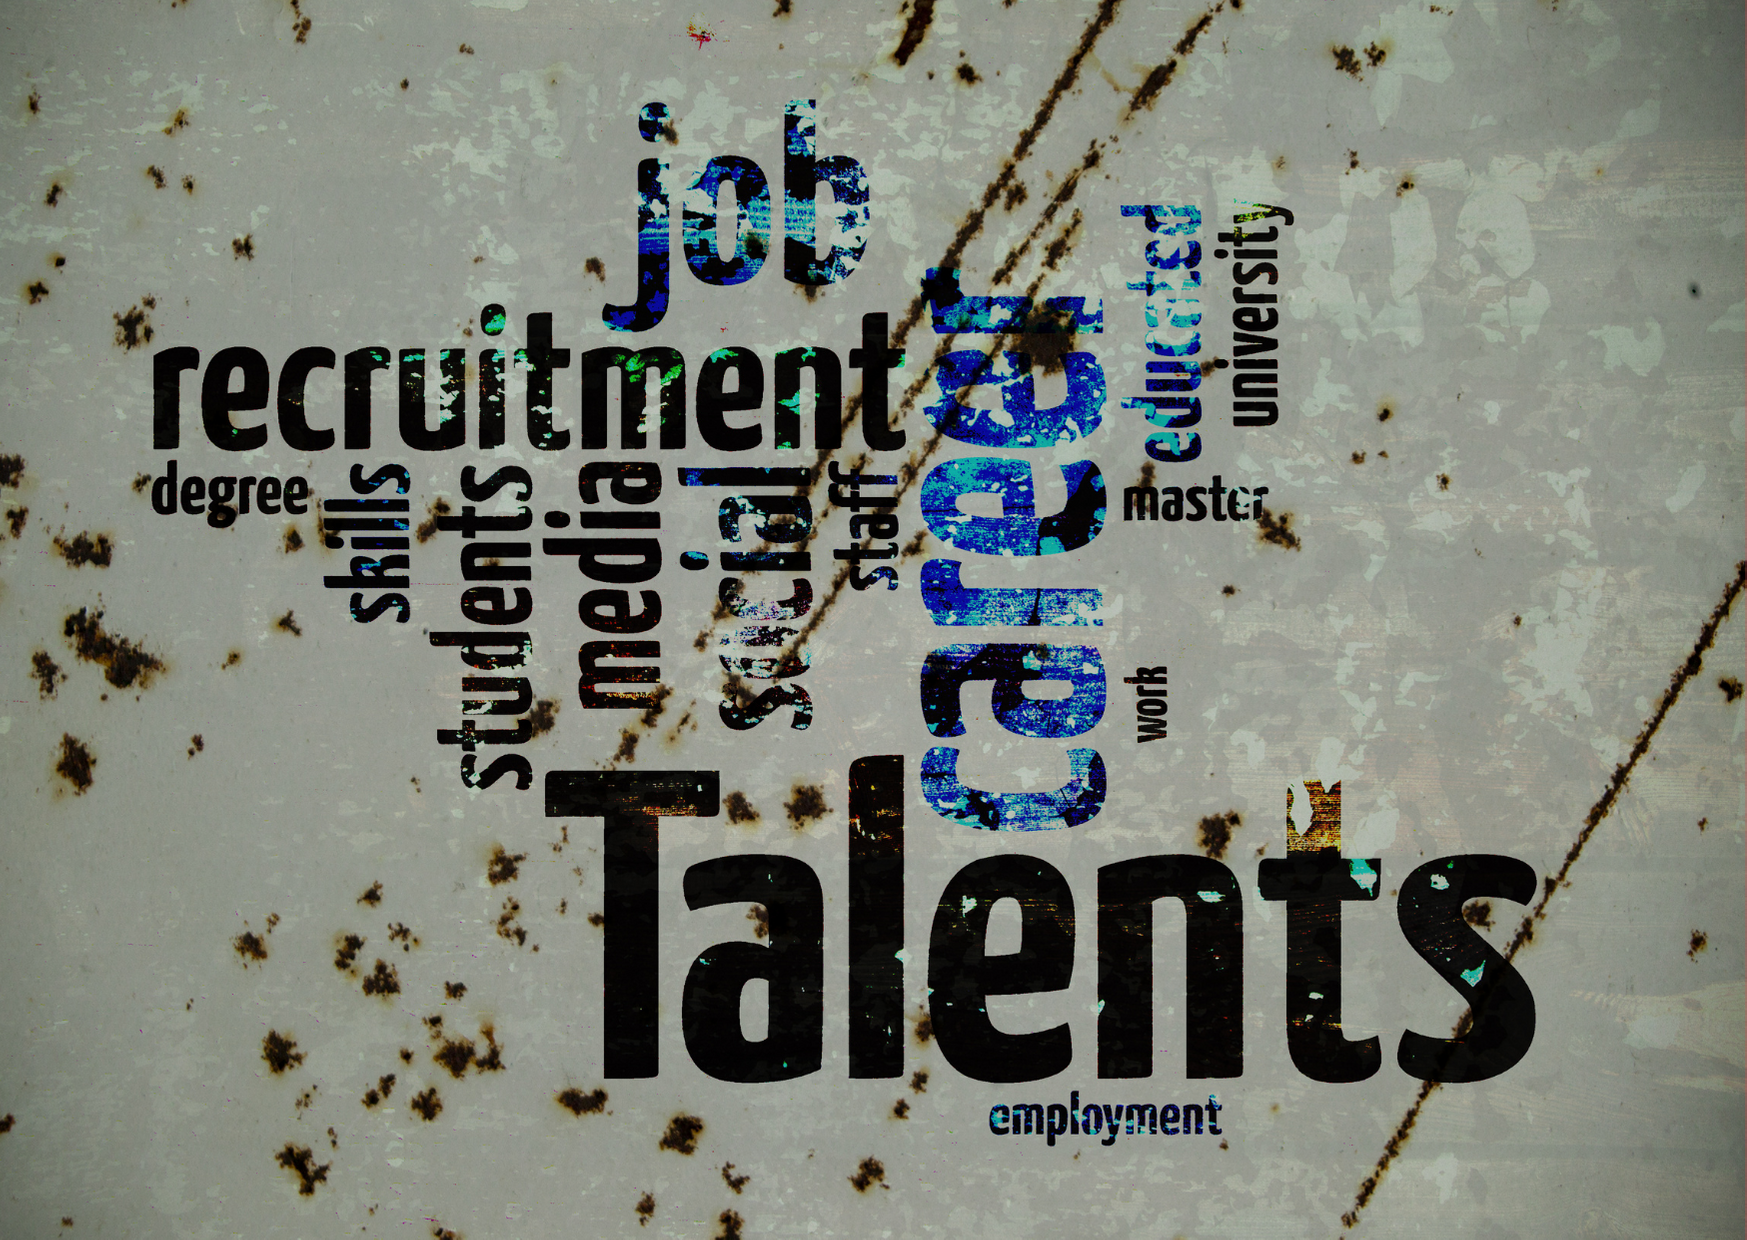 Benefits of Using a Recruitment Agency - For Candidates